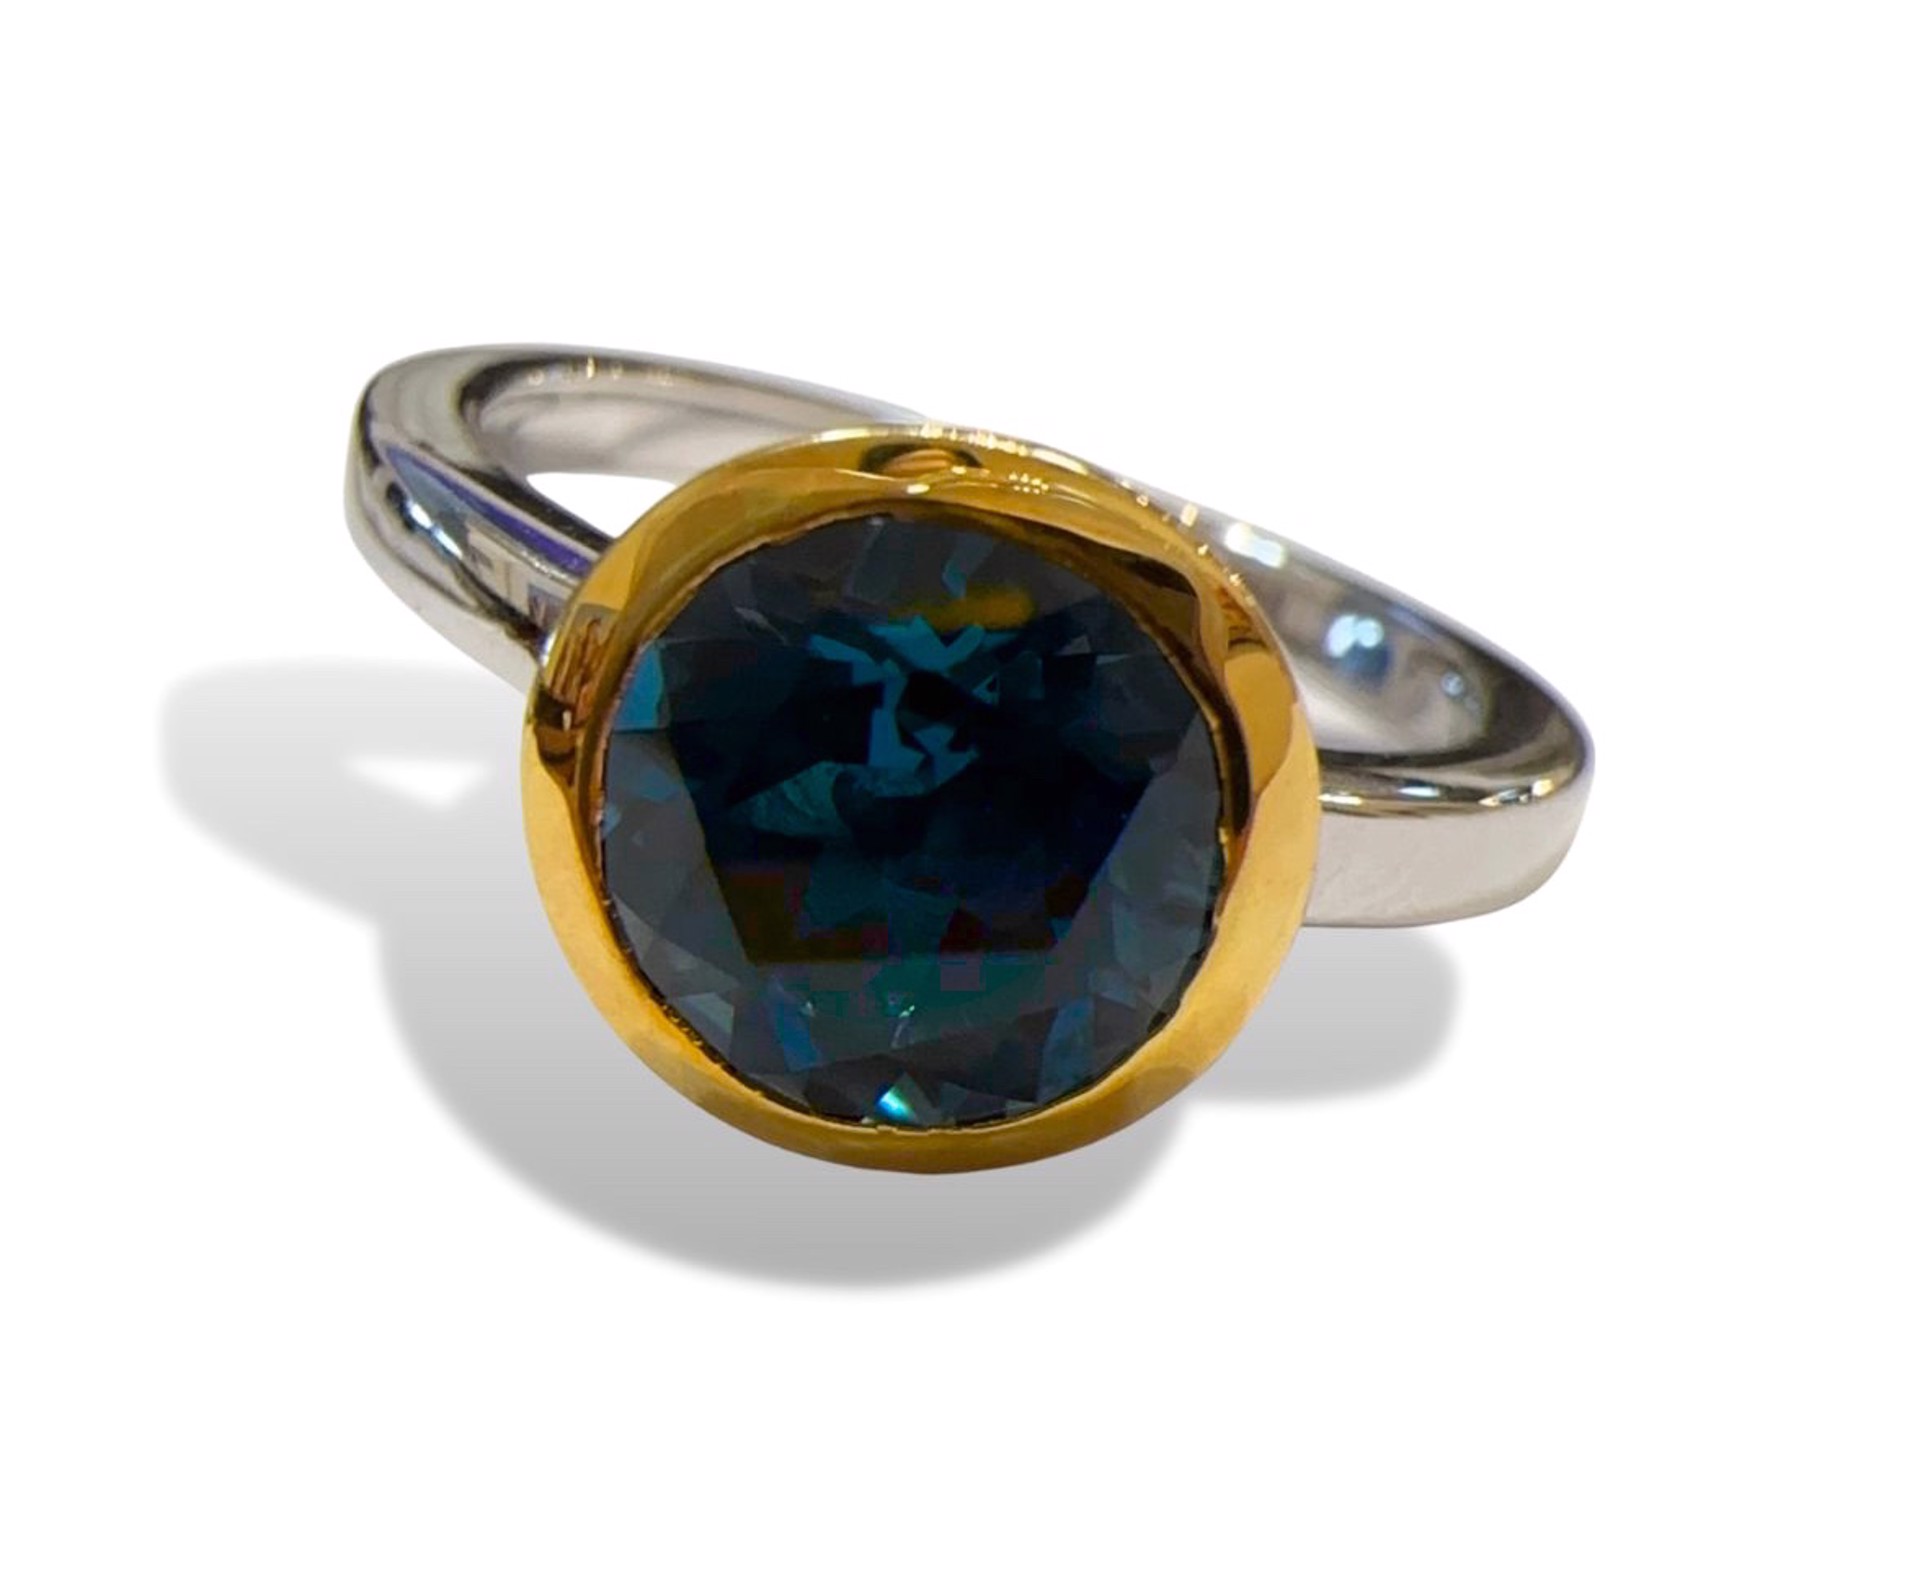 Ring - Sterling Silver & London Blue Topaz with 14kt Gold Surround Size 7.5 R3328 LBT by Joryel Vera